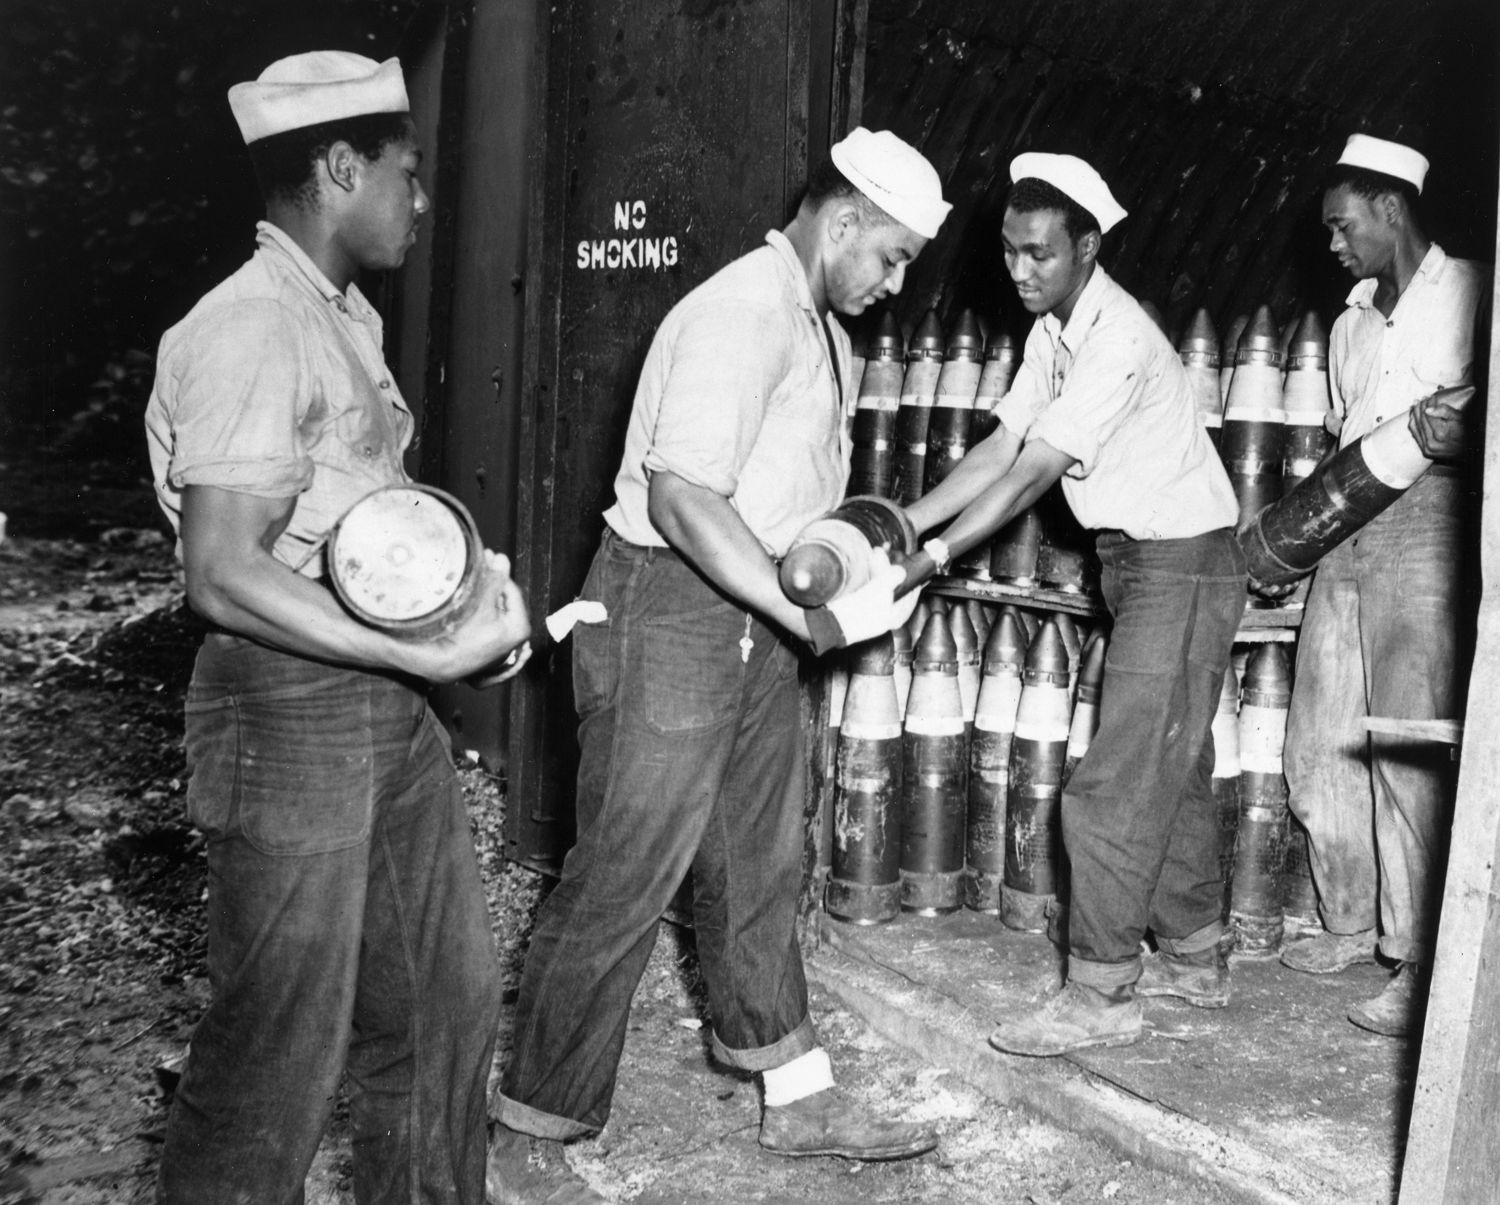 Enlisted men serving on Espiritu Santo in the New Hebrides place 6-inch shells in magazines at the Naval Ammunition Depot. 